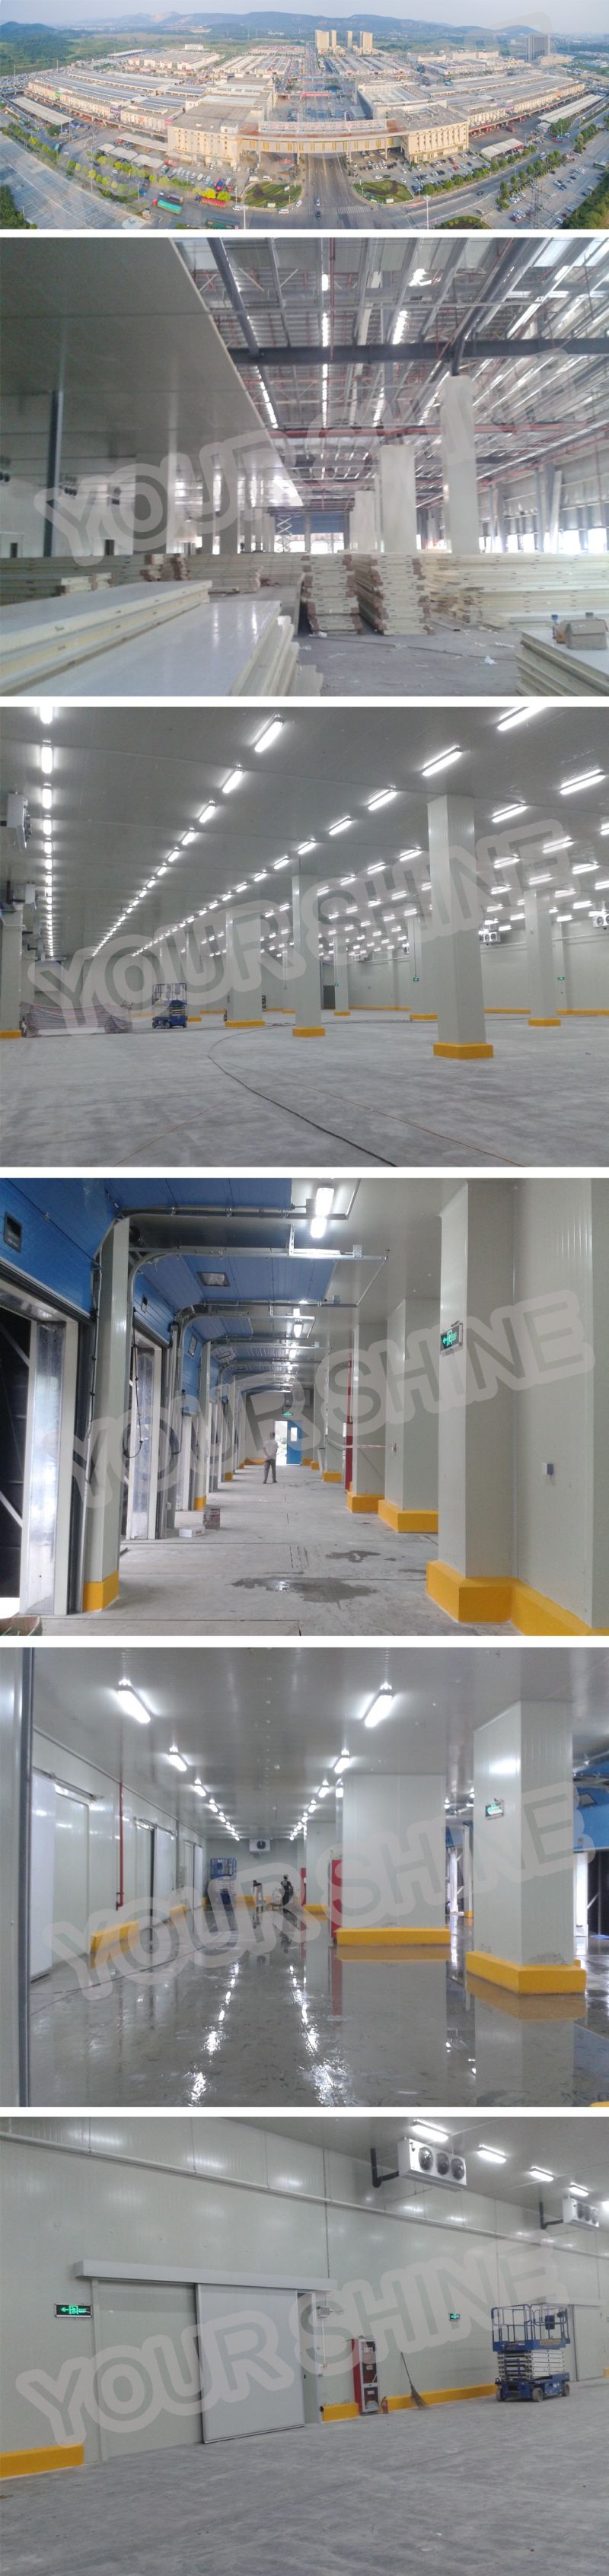 Magnesium Oxysulfate Sandwich Panel for Clean Room, Cleanroom Wall Panels, Clean Room Sandwich Panels